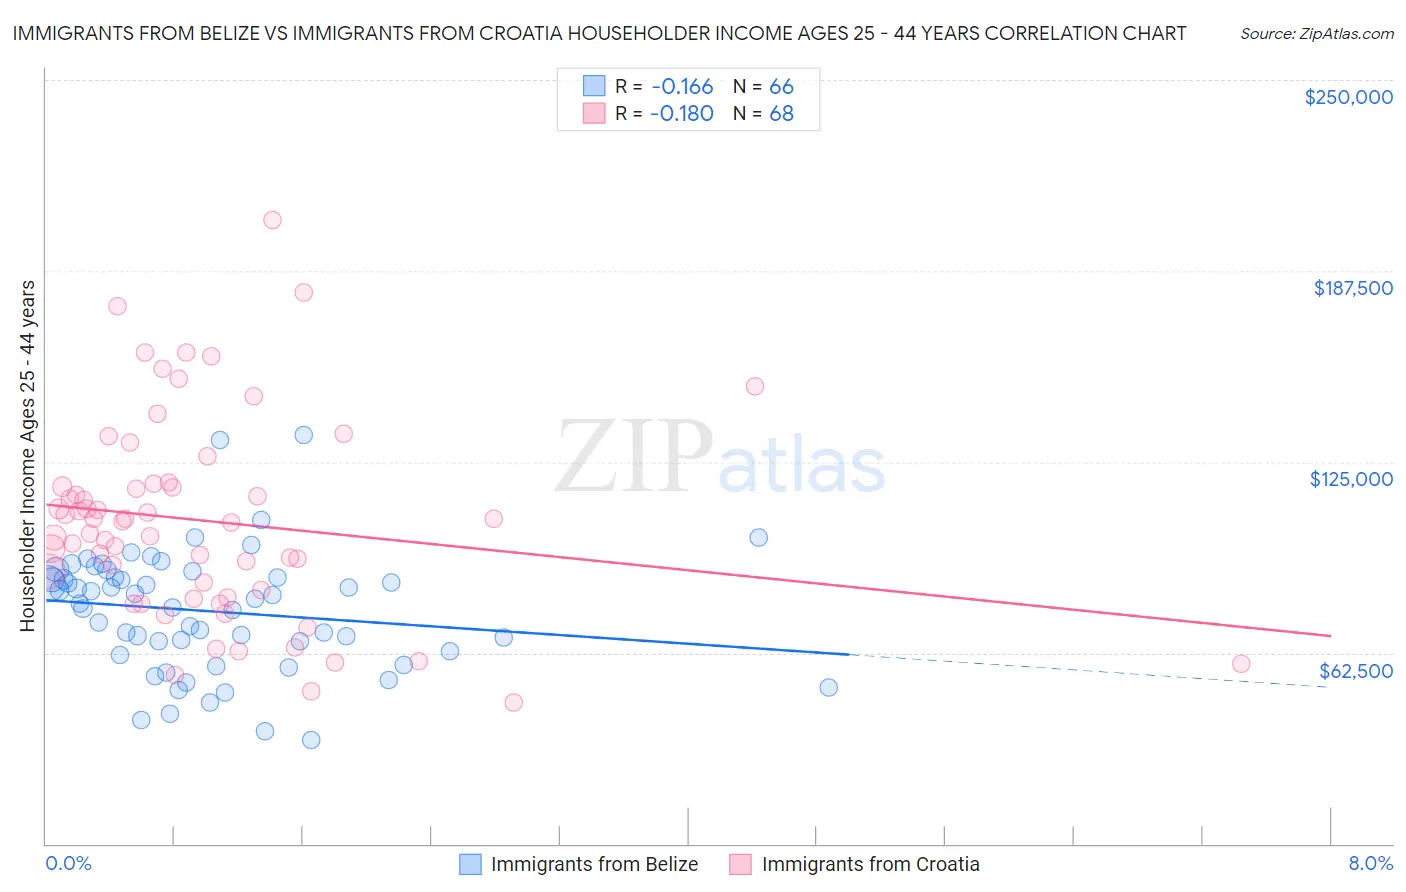 Immigrants from Belize vs Immigrants from Croatia Householder Income Ages 25 - 44 years